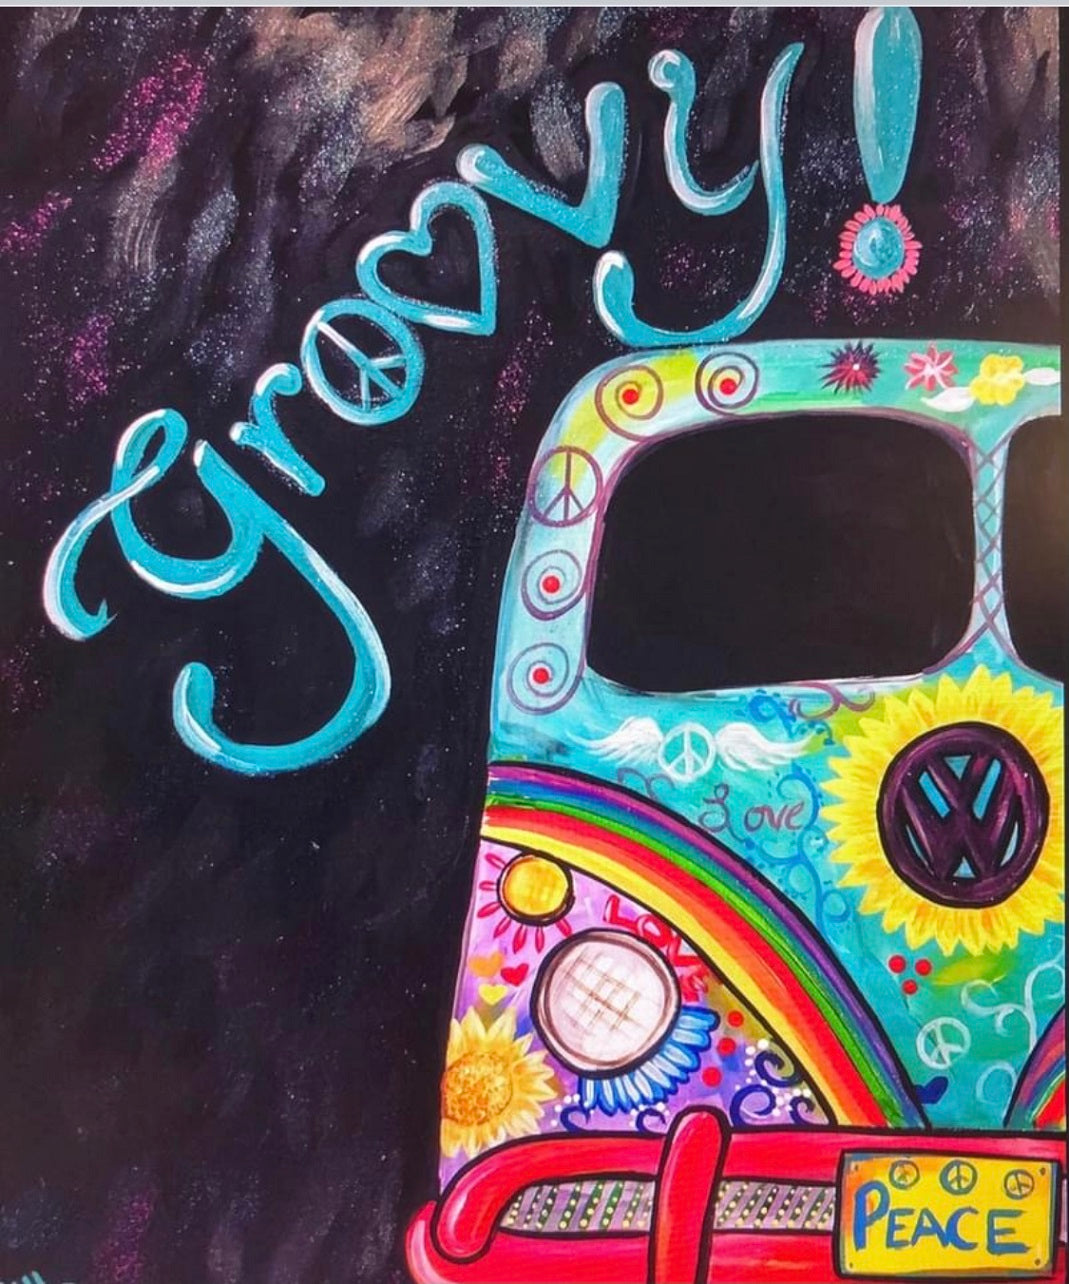 Groovy - Art Bayou Paint Party schedule your fun today!